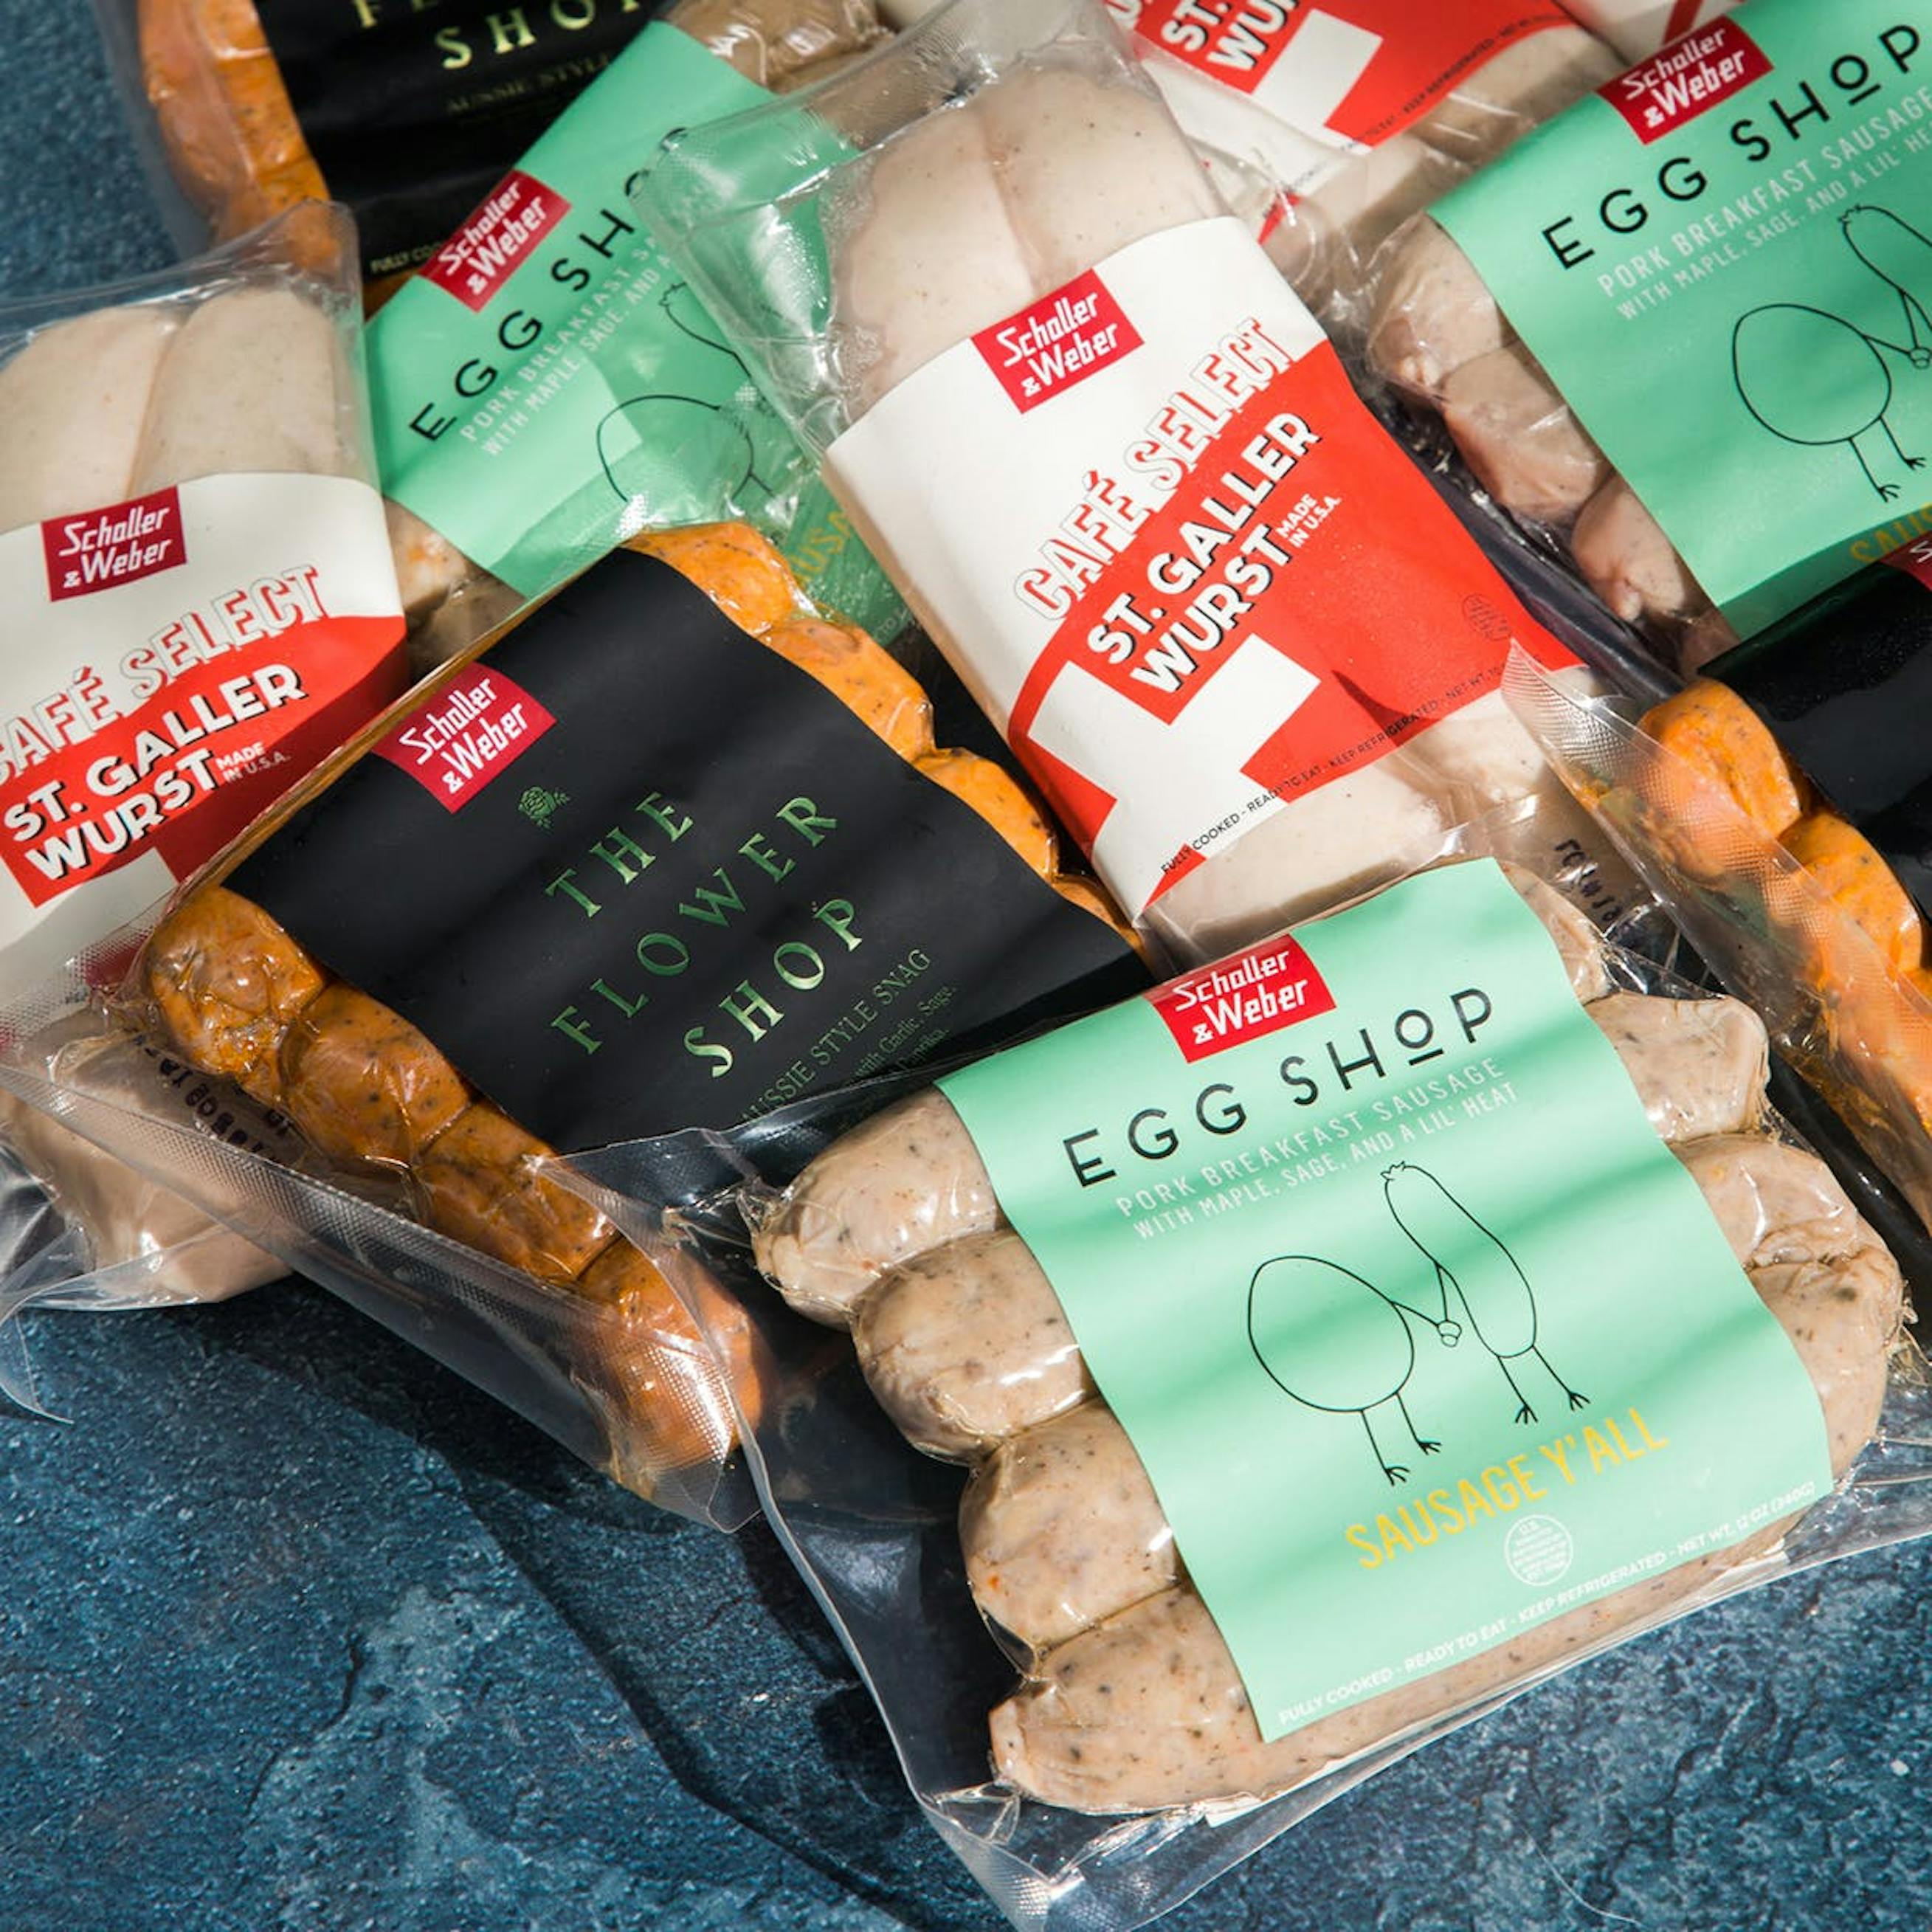 L.E.S. Sausage Series Combo Pack for 10 From Schaller & Weber